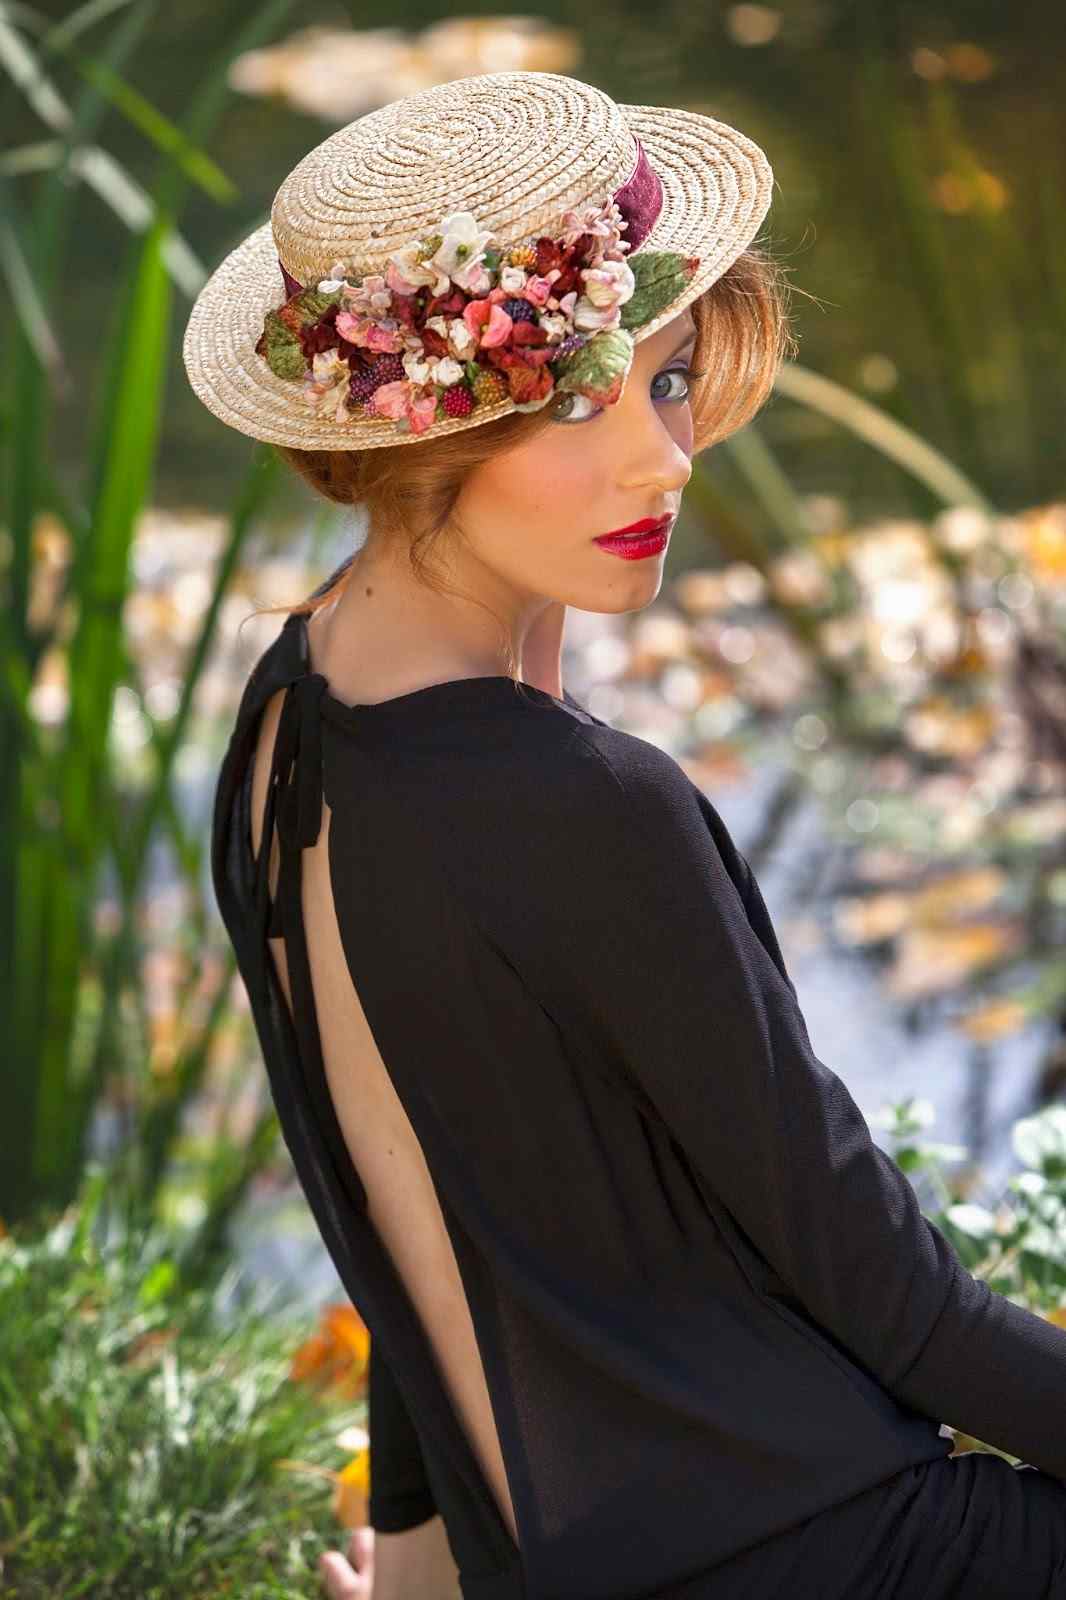 Straw hat for ladies summer outfit ideas elegant hat models dress backless